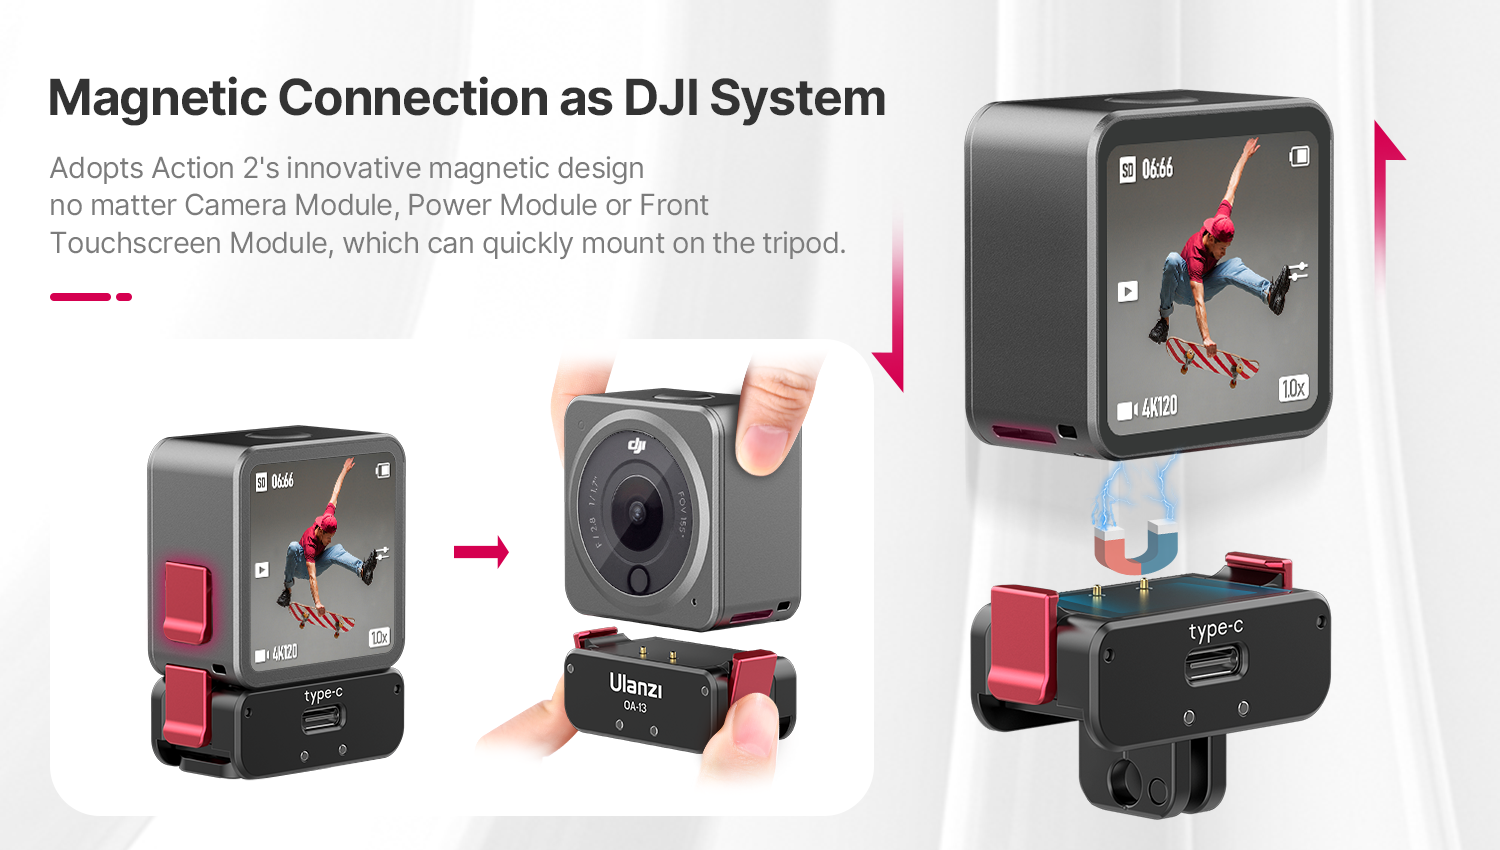 DJI Action 2 multifunctional cam has a magnetic locking design for module  switching » Gadget Flow